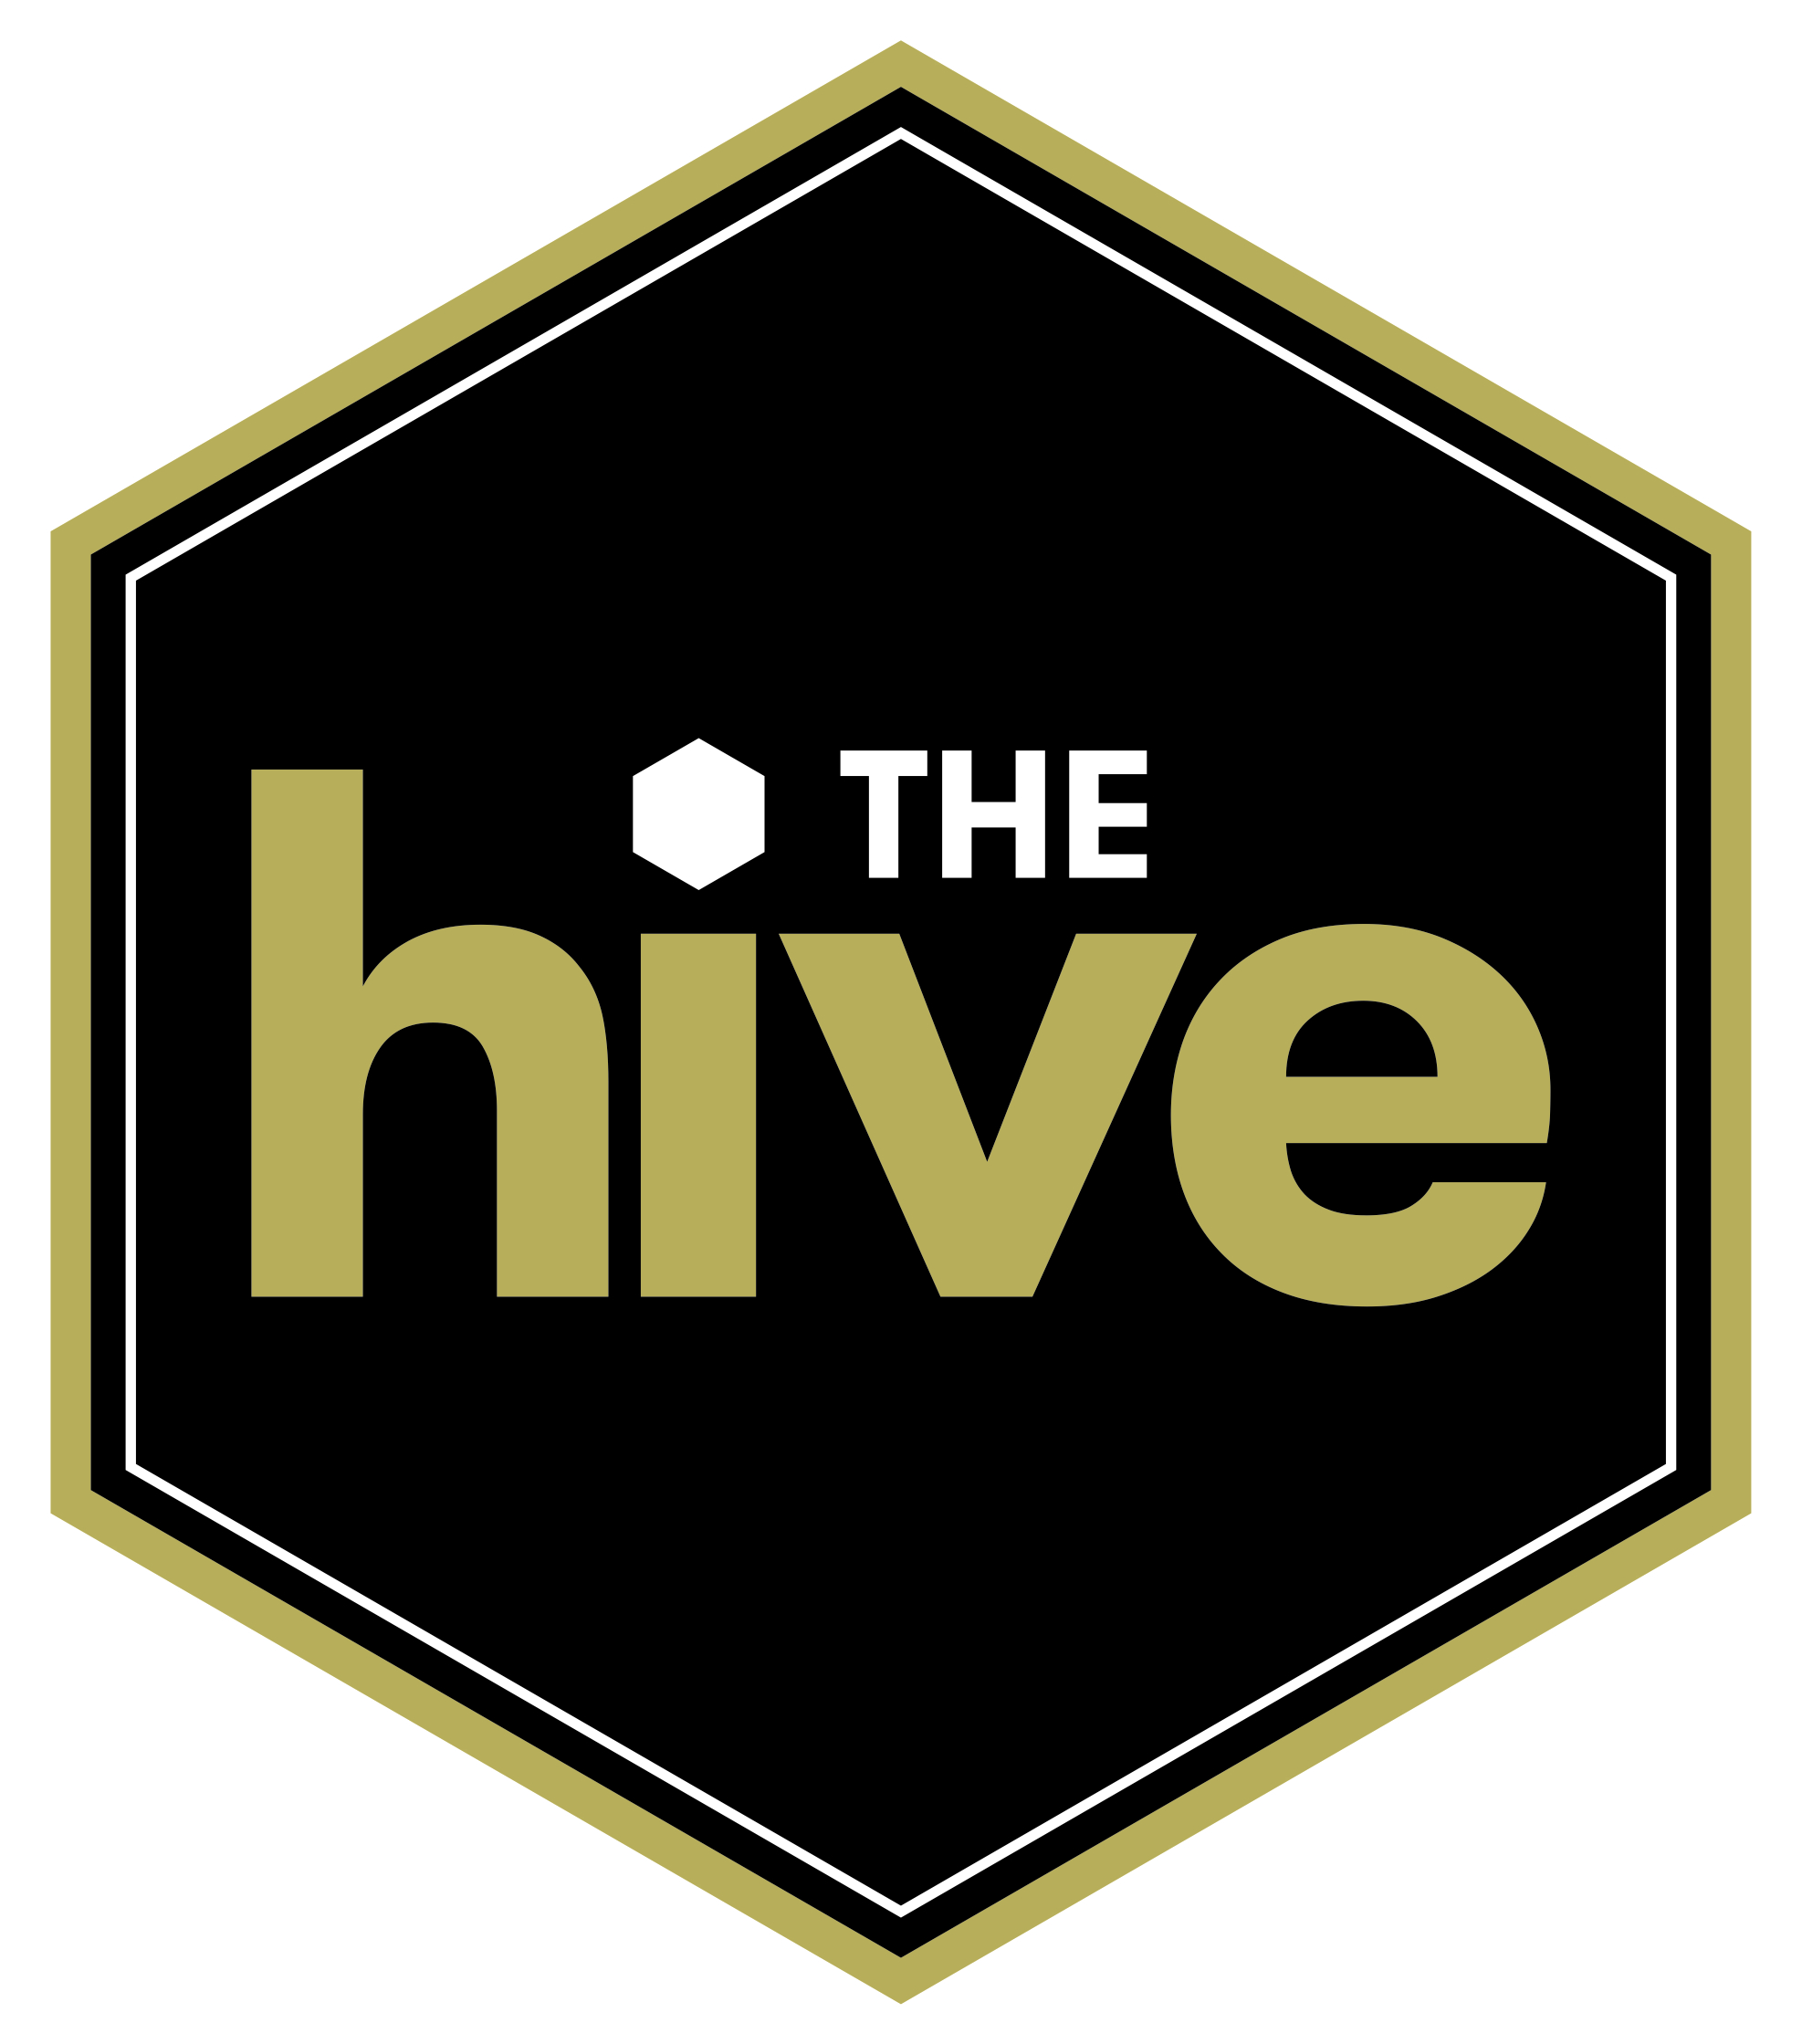 The Hive The Hive